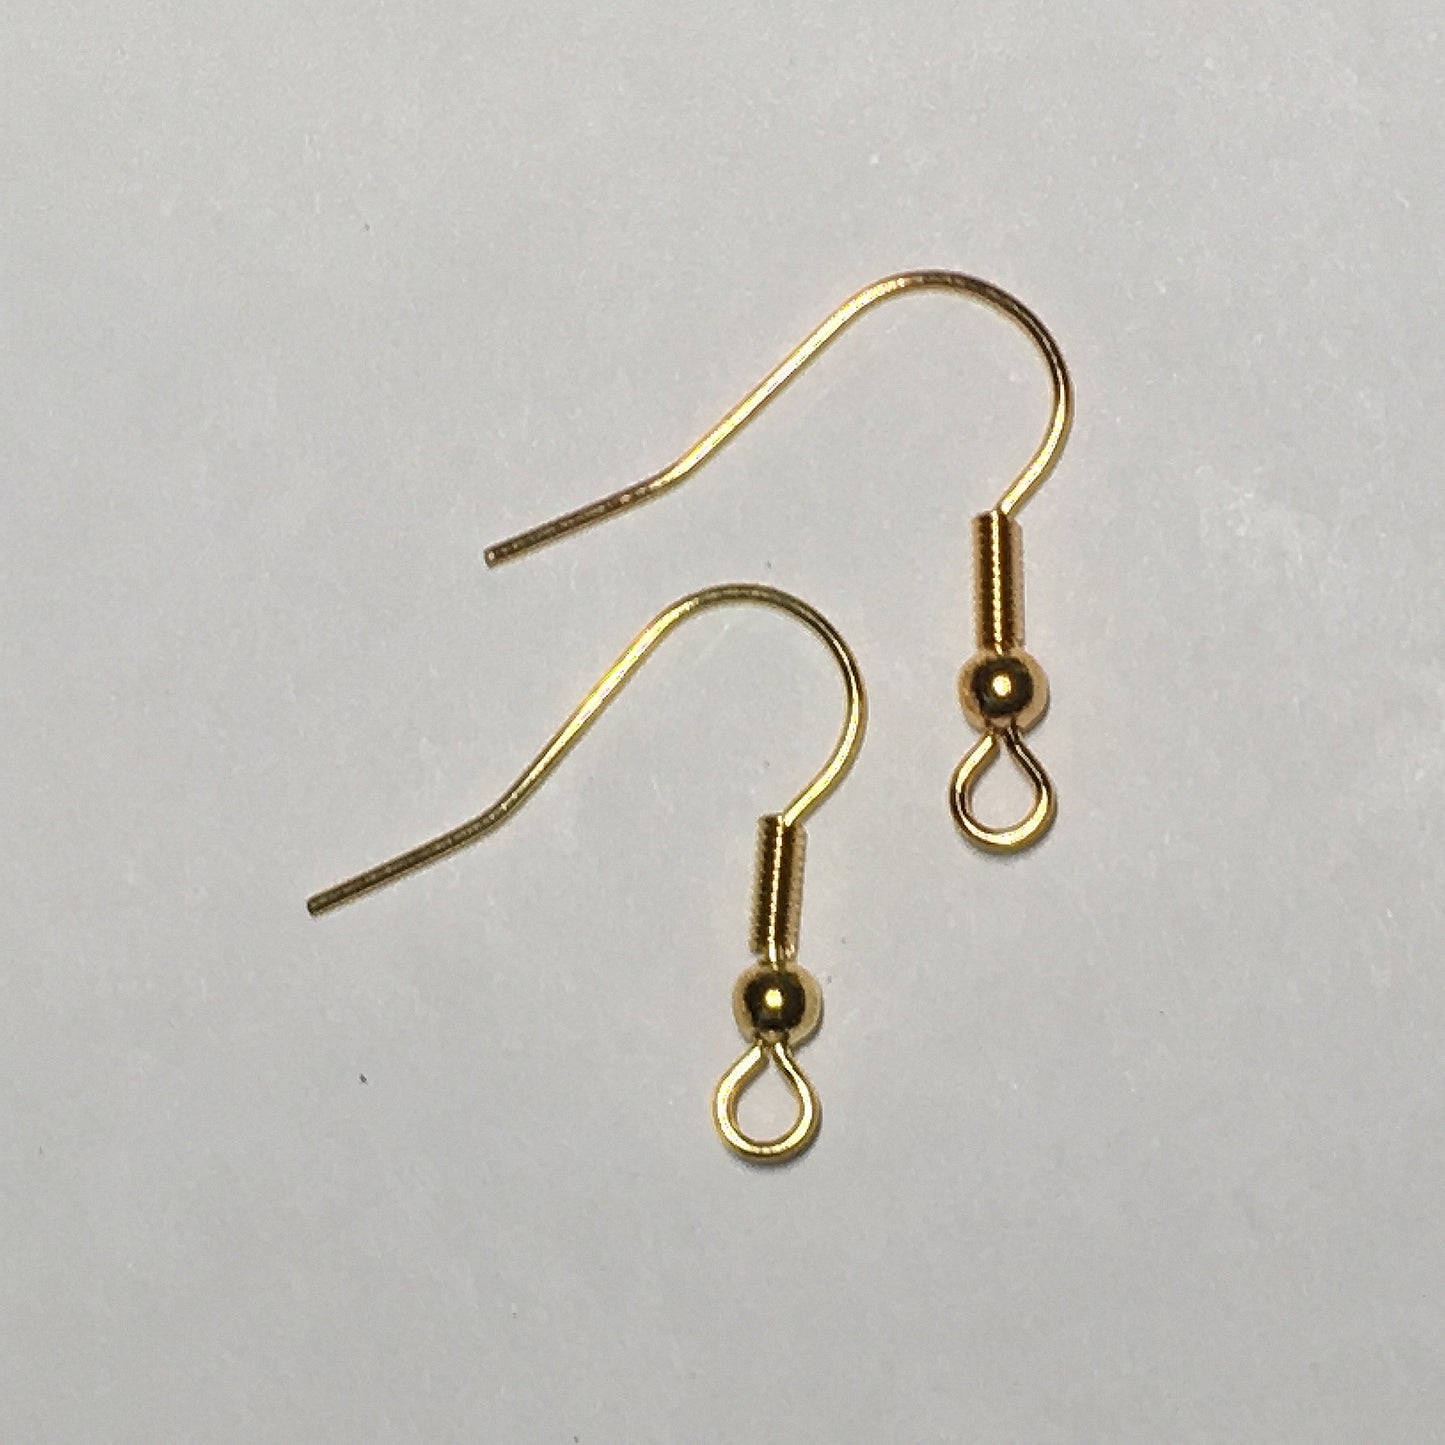 21-Gauge 22 mm Gold Plated French Fish Hook Ear Wires - 1, 5 or 10 Pair